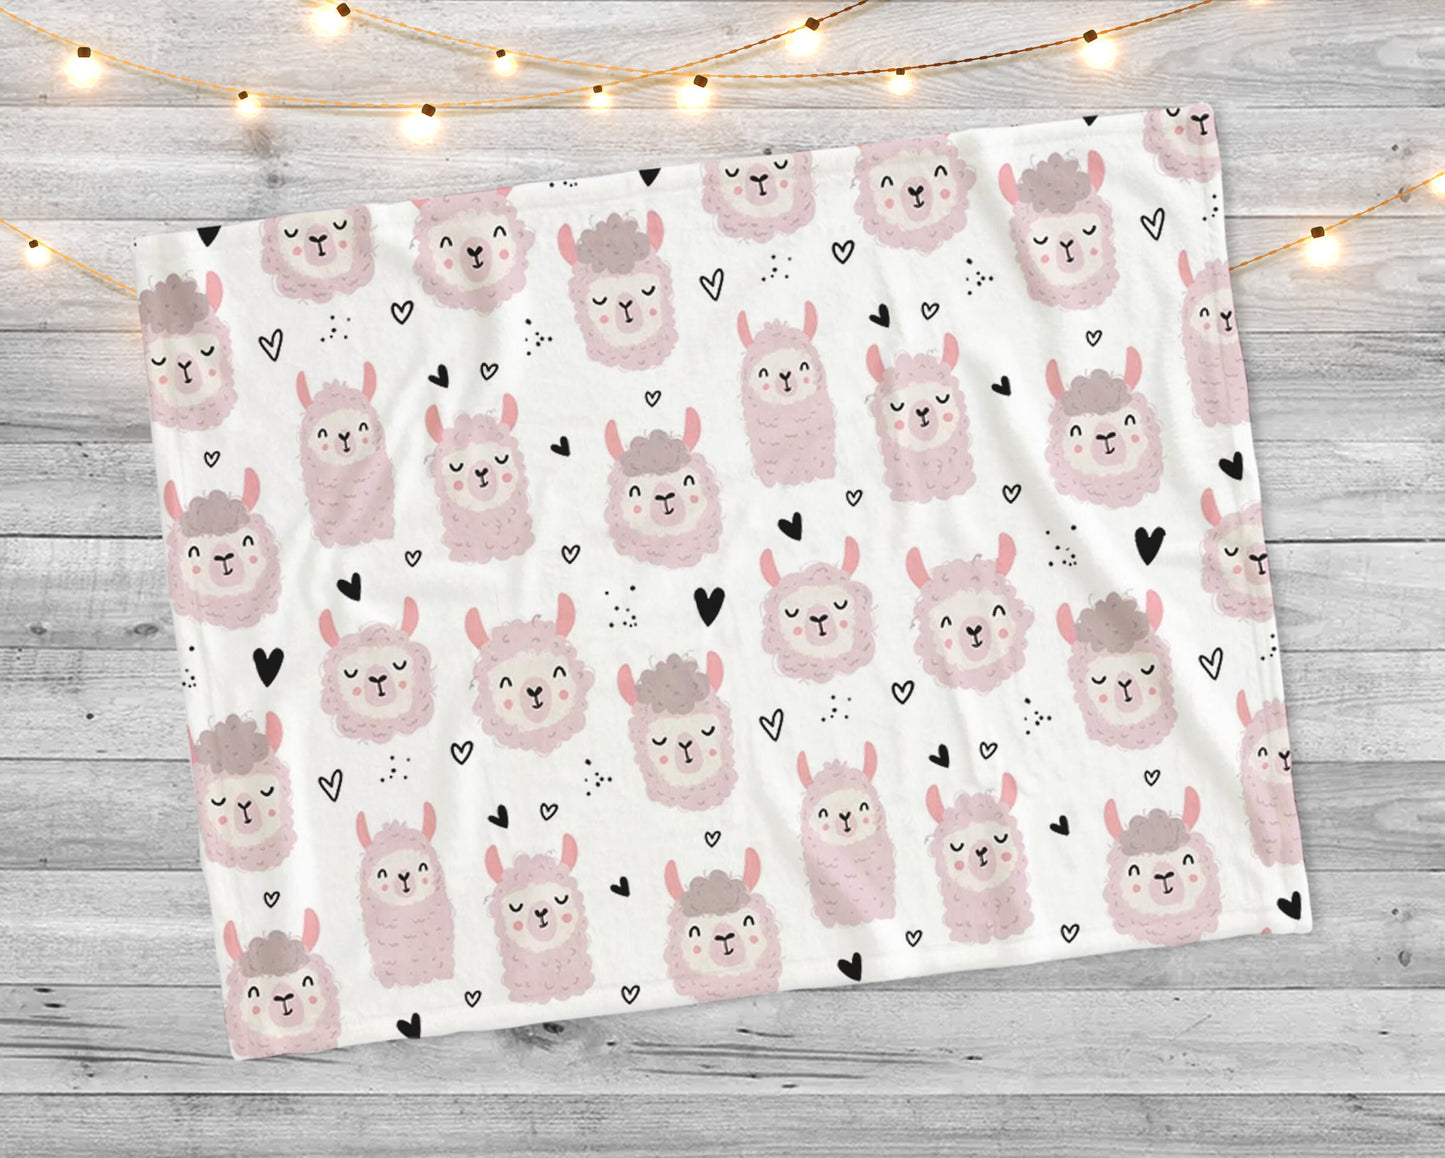 Personalized Hand-Drawn Llama Design blanket with Name, Cute lamas and hearts, Custom blanket gift, Birthday baby shower gift